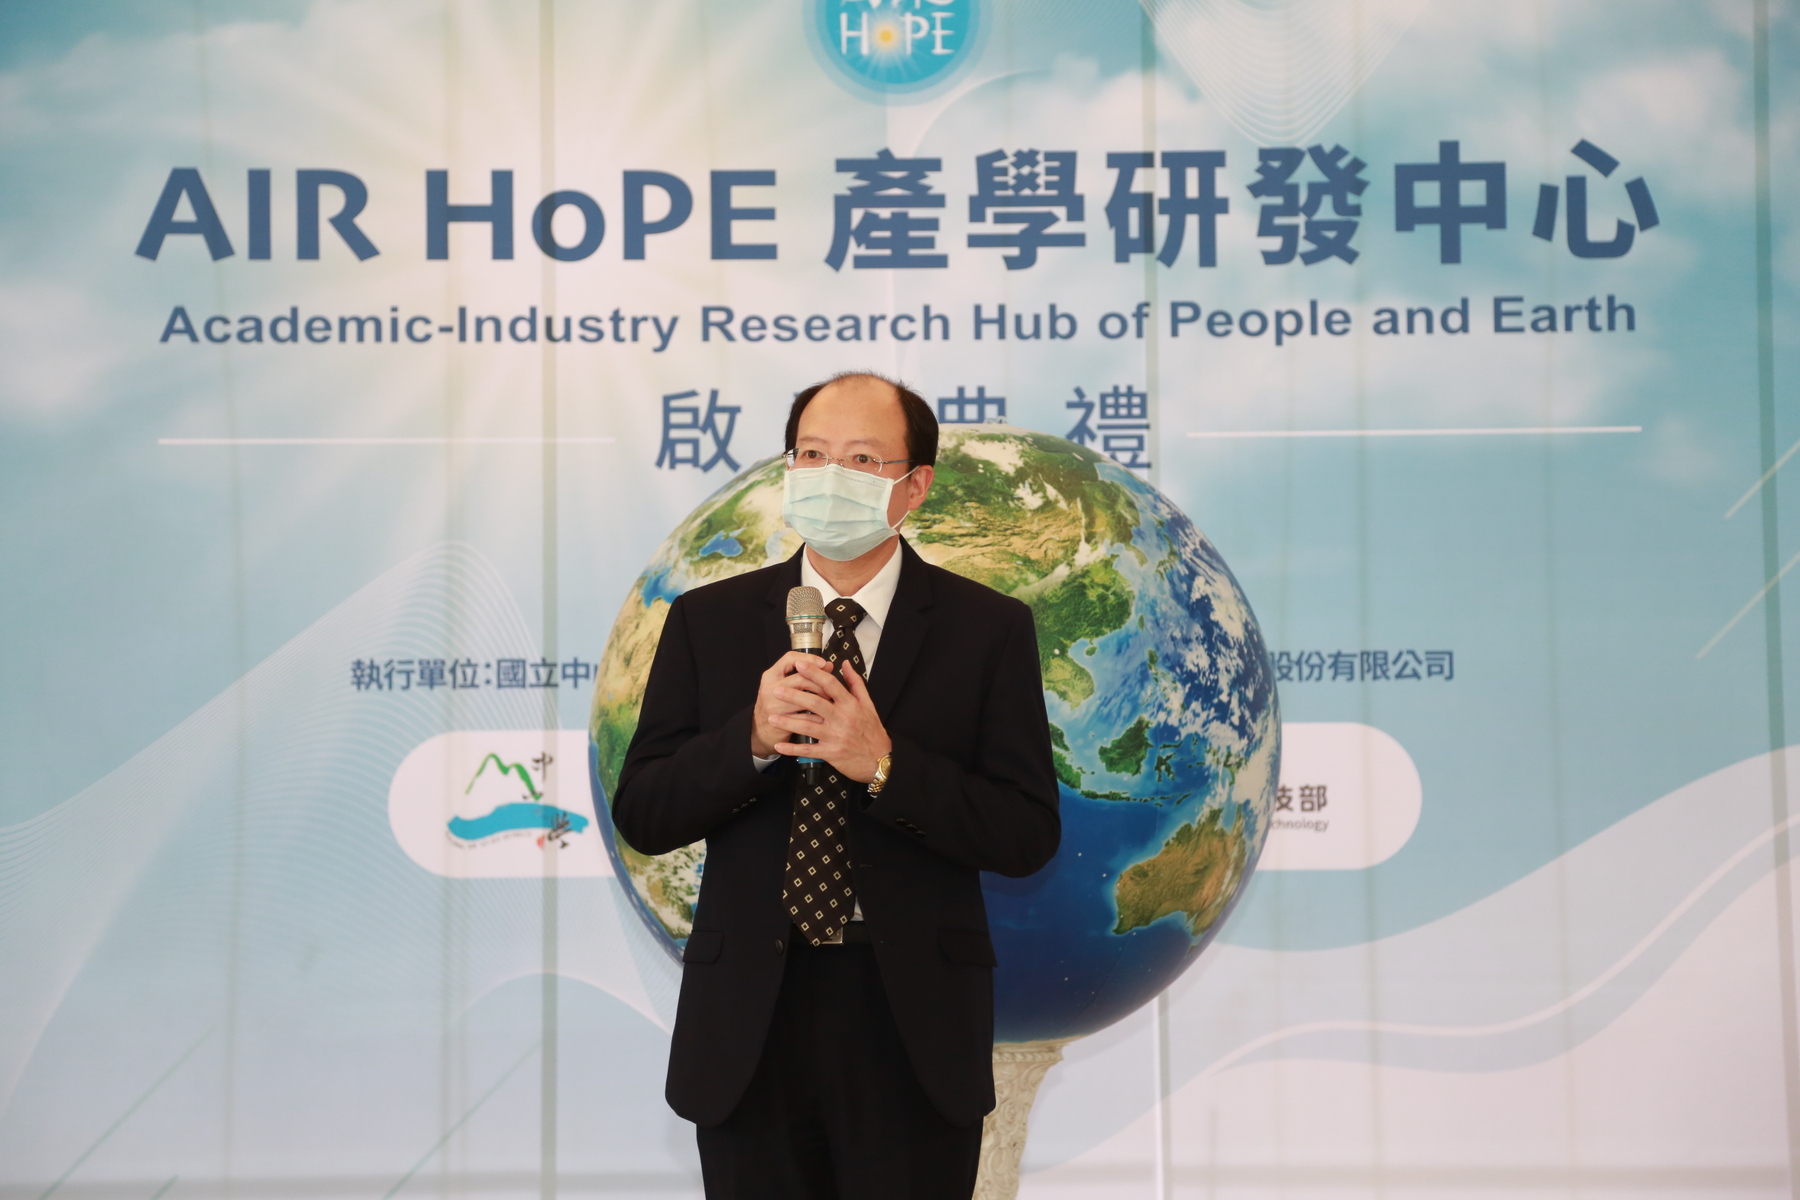 Hsing-Fei Wu, Senior Executive Officer of the Department of Academia-Industry Collaboration and Science Park Affairs of the Ministry of Science and Technology